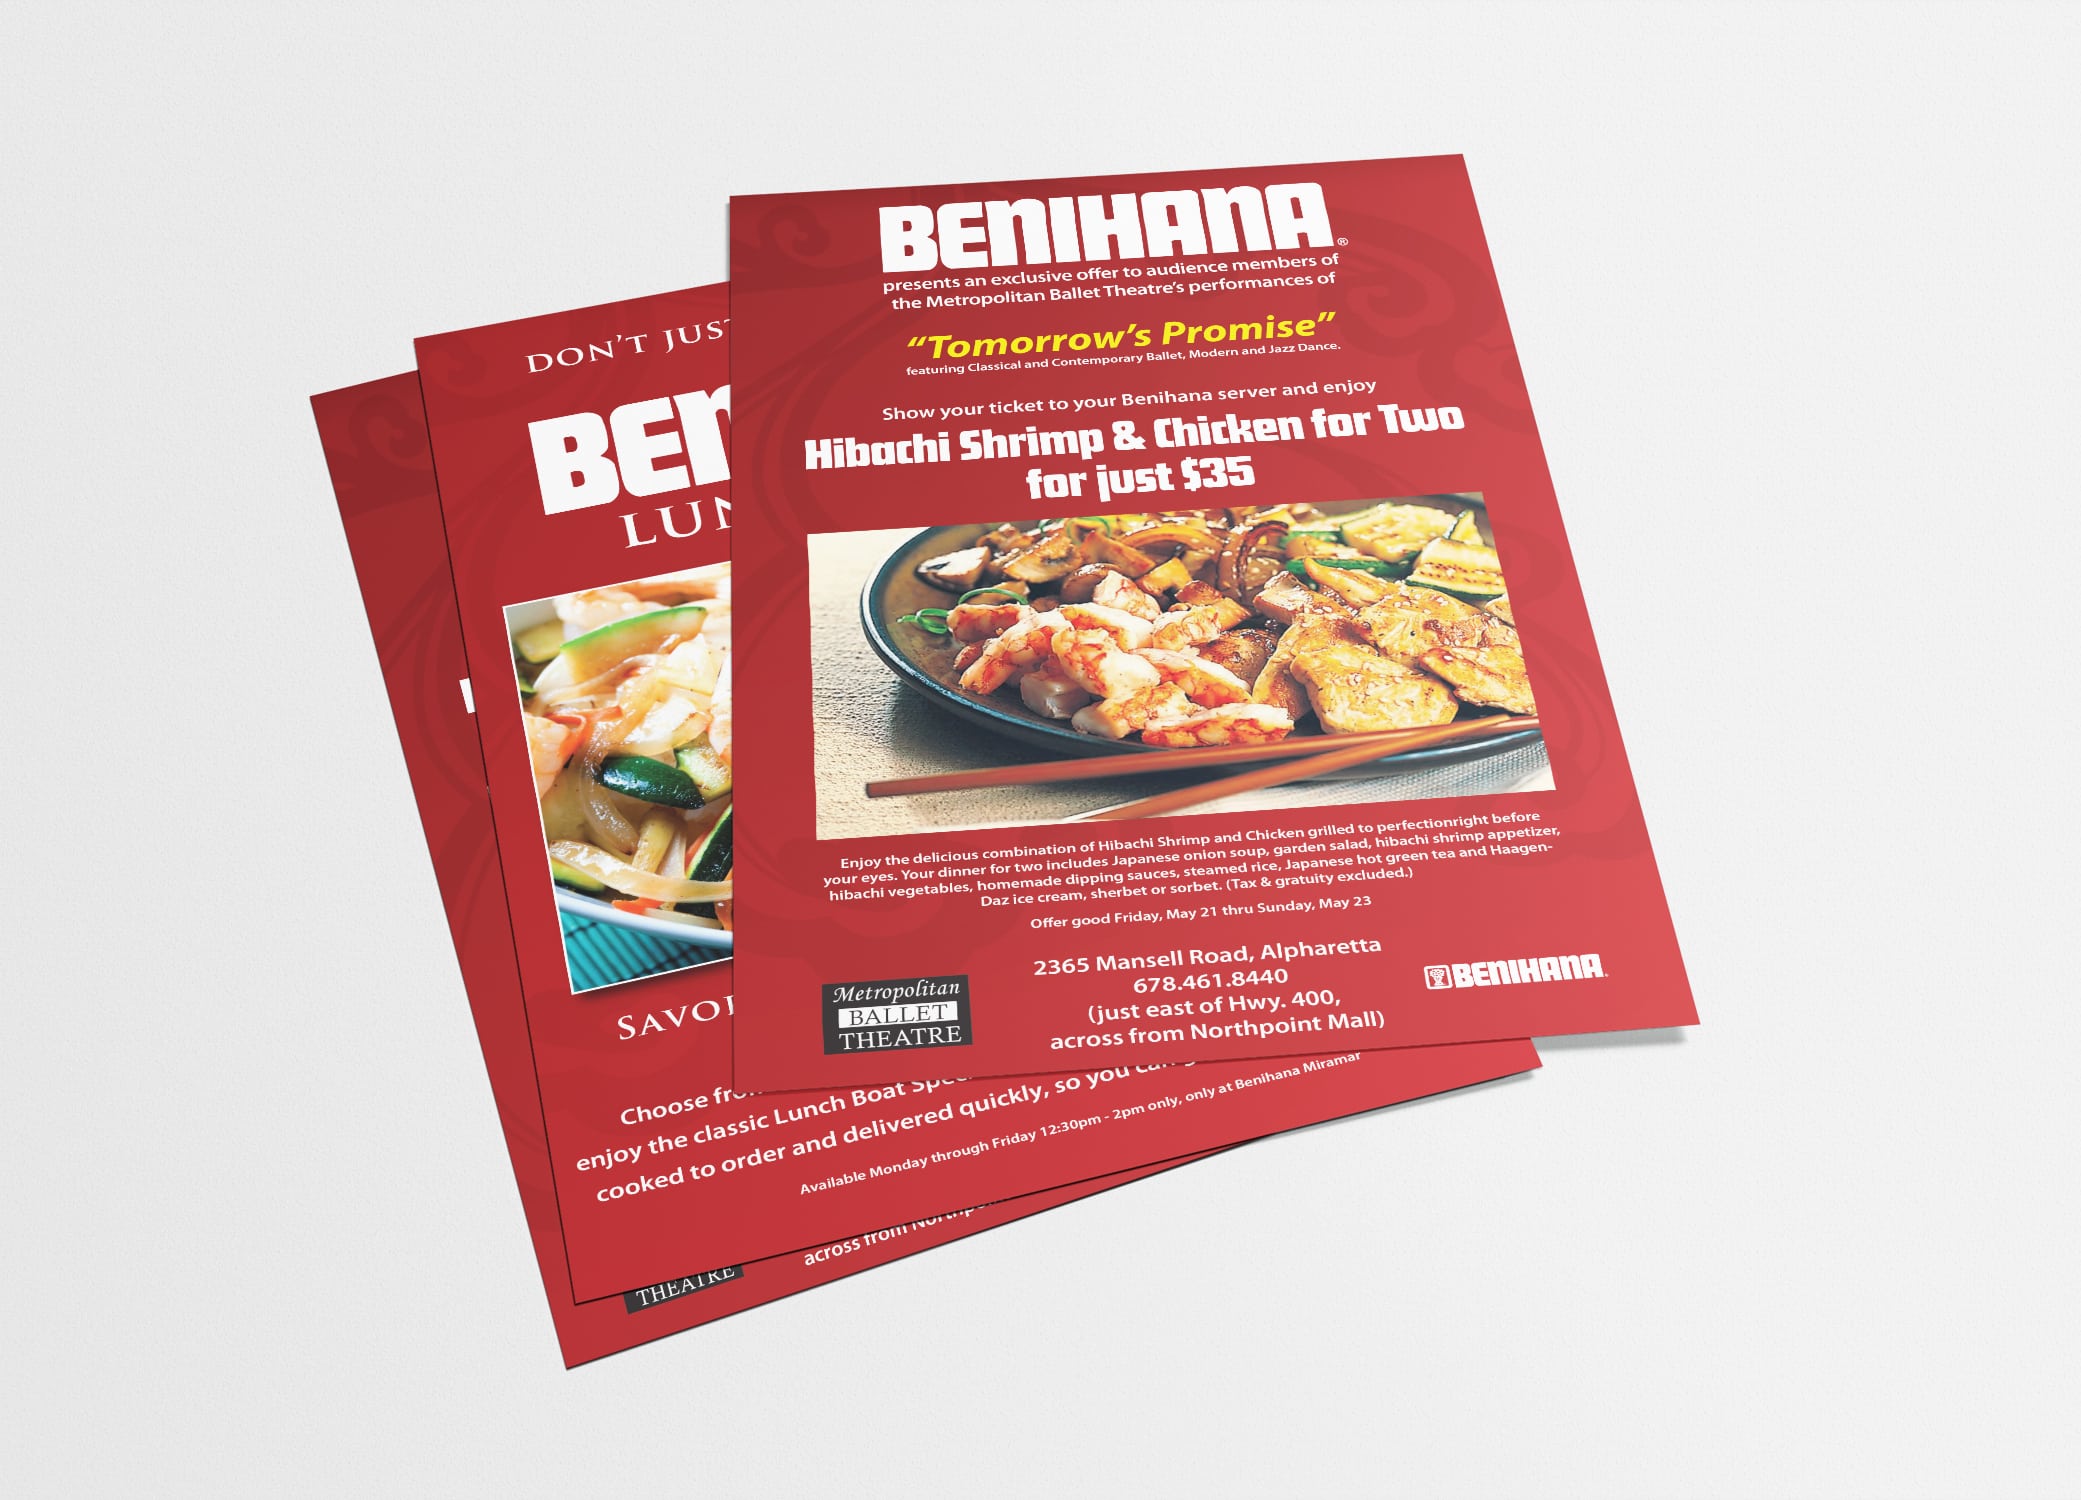 Benihana food brand design red poster featuring the restaurant's exclusive entree against grey backdrop.